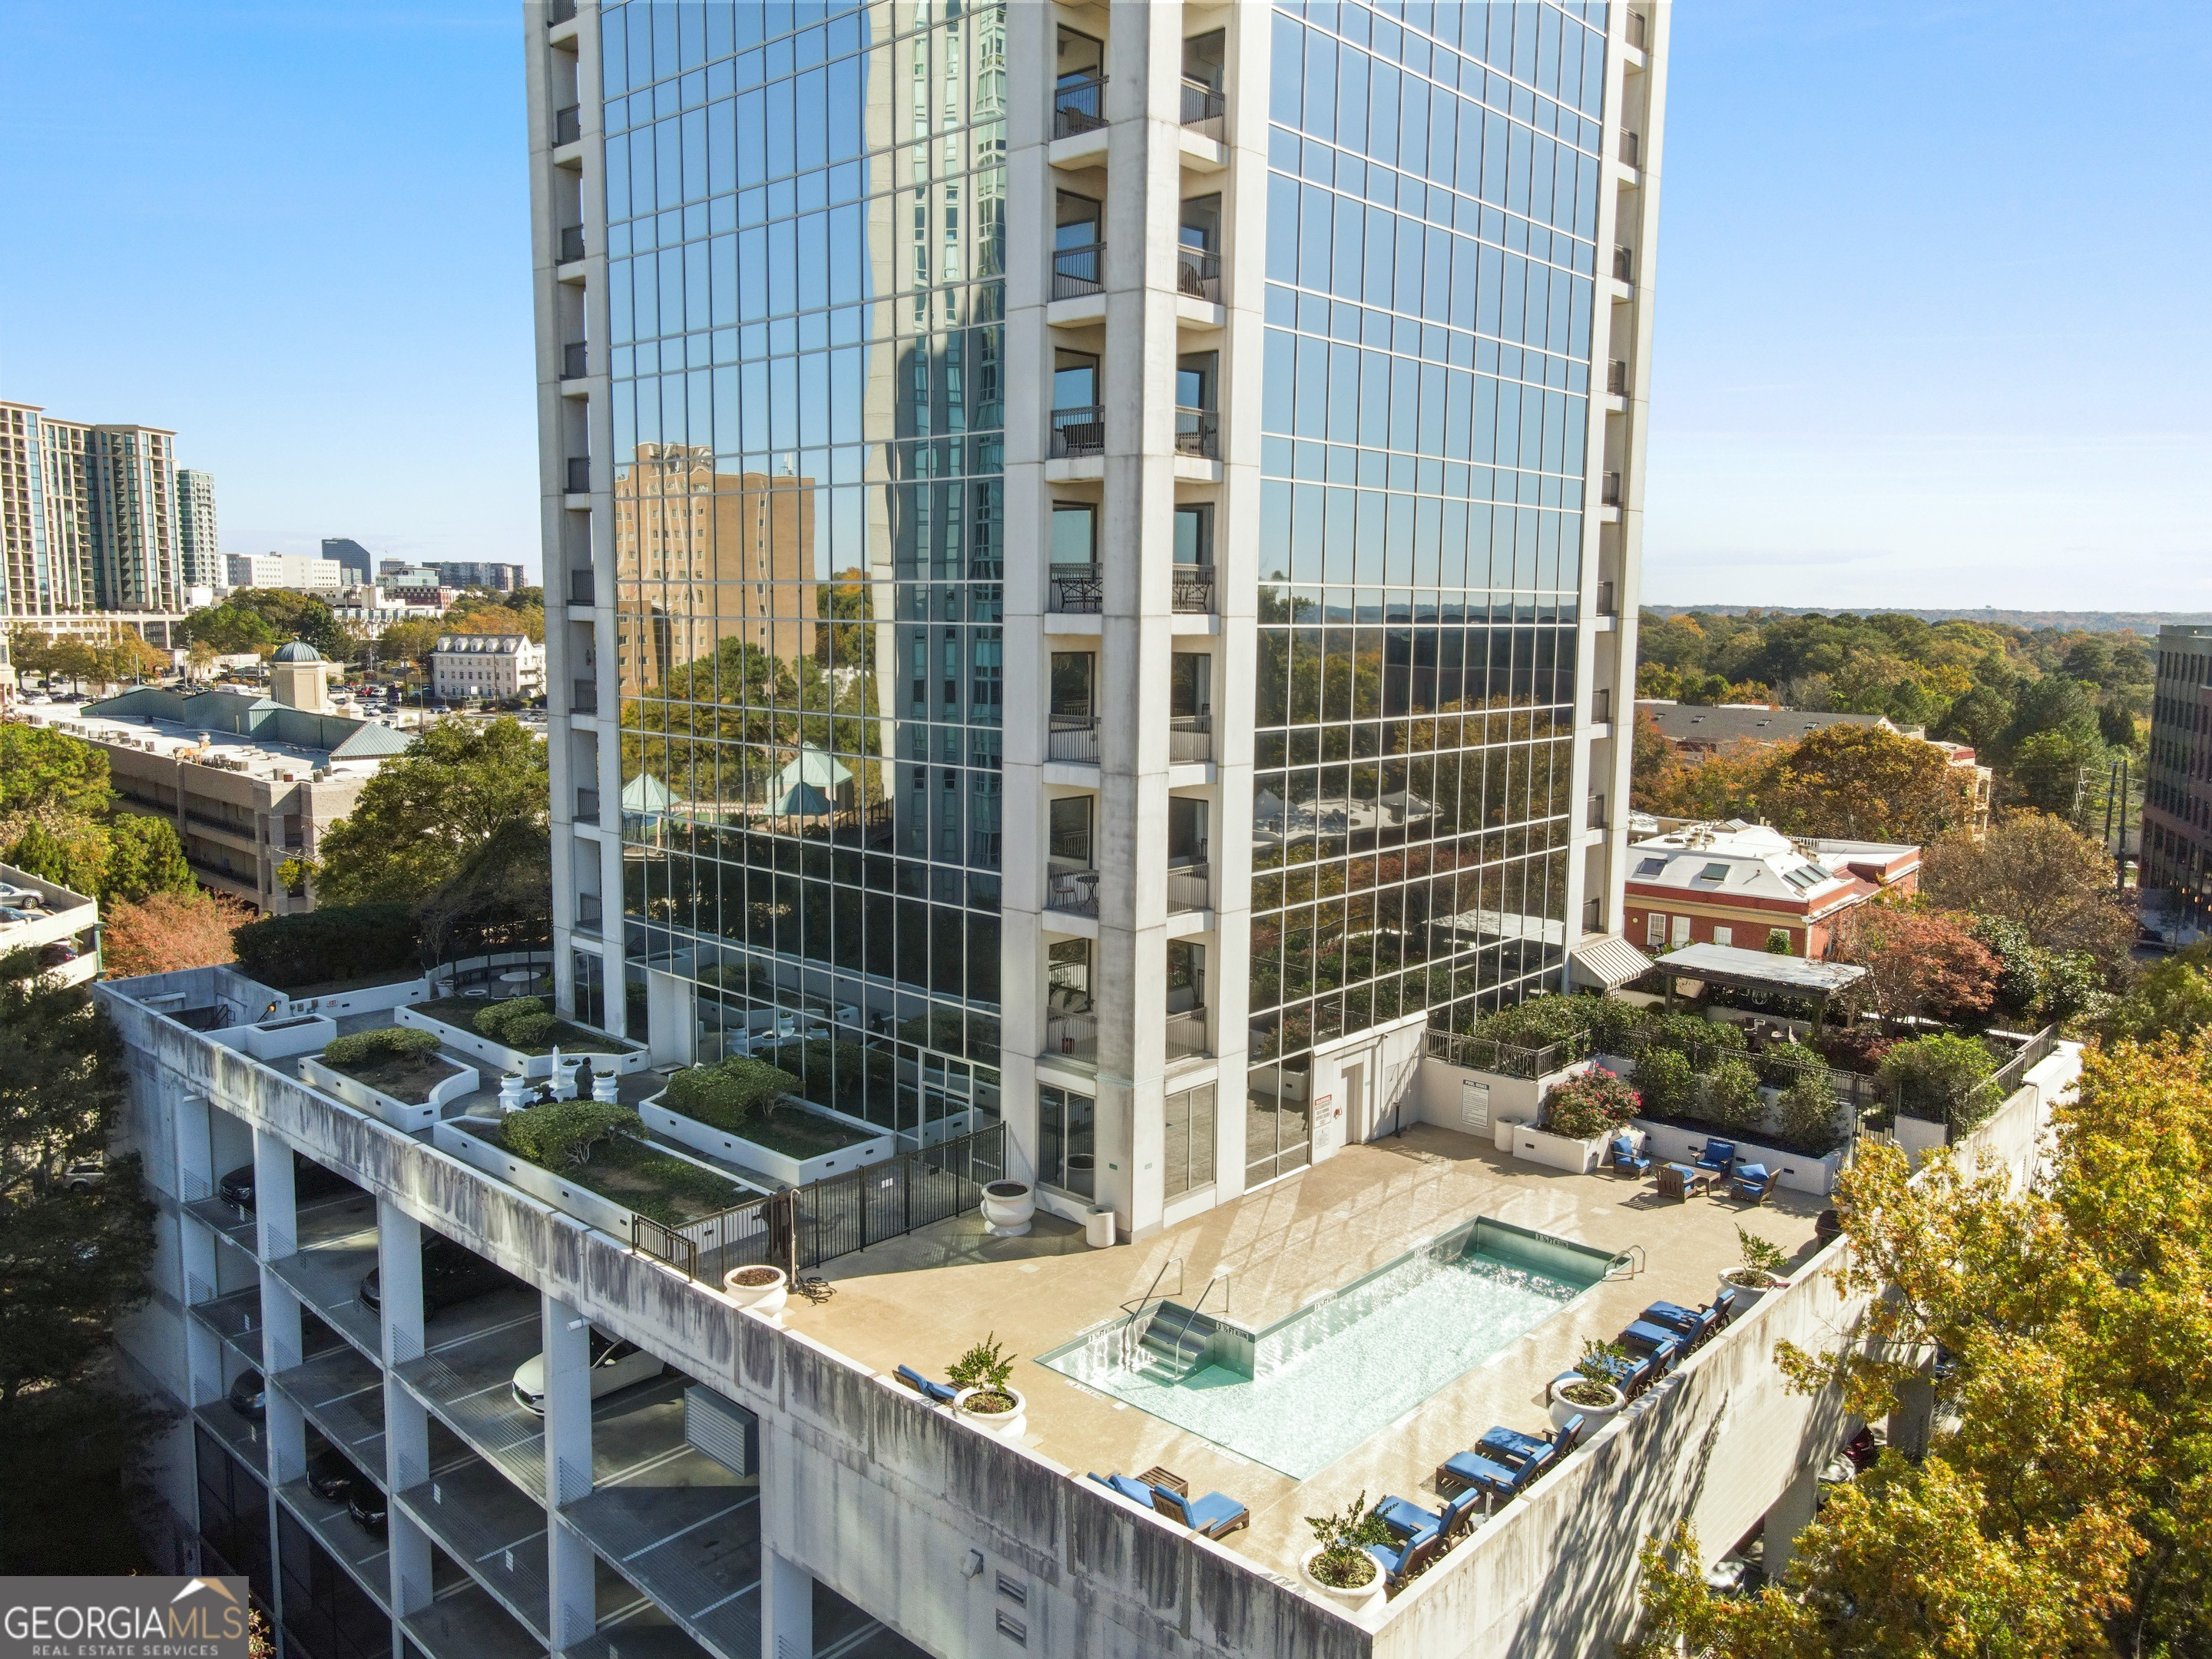 28. 2828 Peachtree Road NW